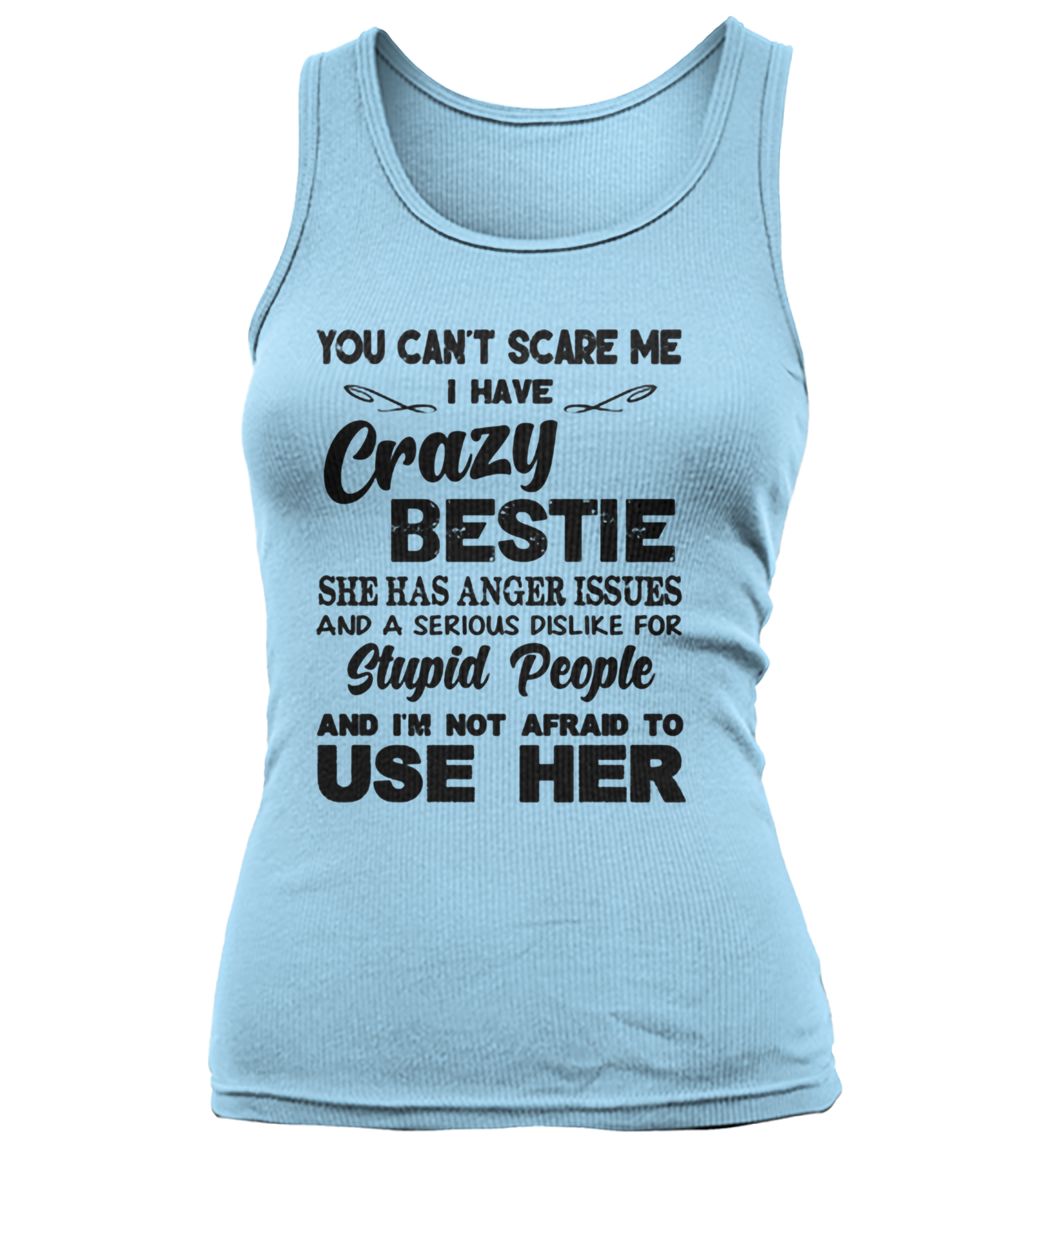 You can't scare me i have crazy bestie she has anger issues and a serious dislike for stupid people women's tank top